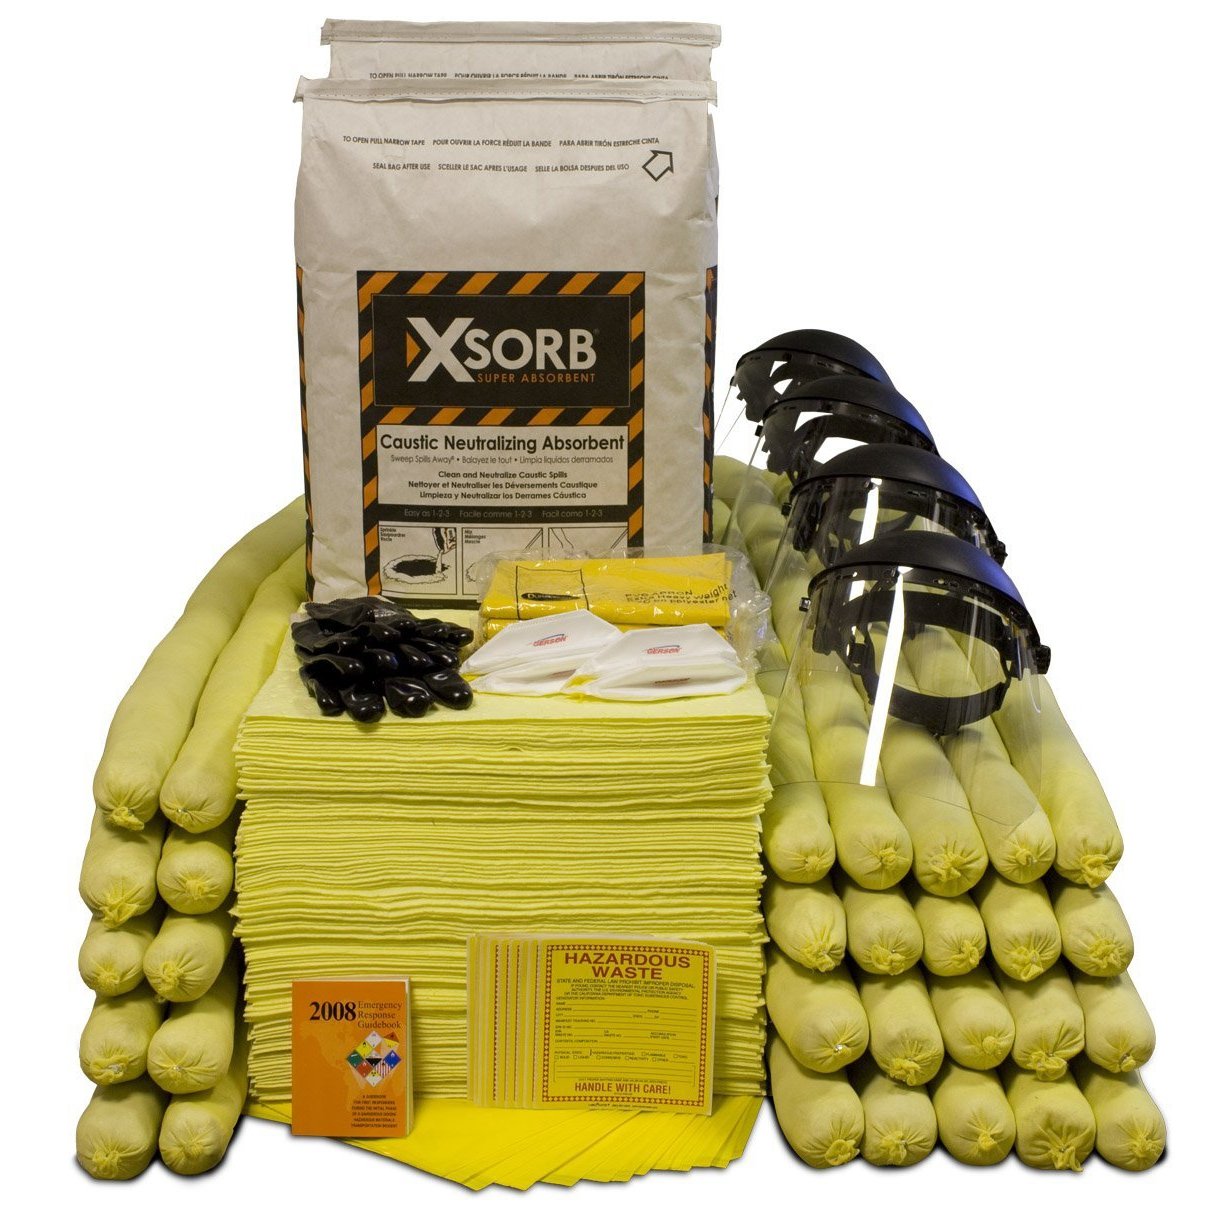 XSORB Caustic Neutralizing 95 gal Spill Response Kit - 1 OVERPACK